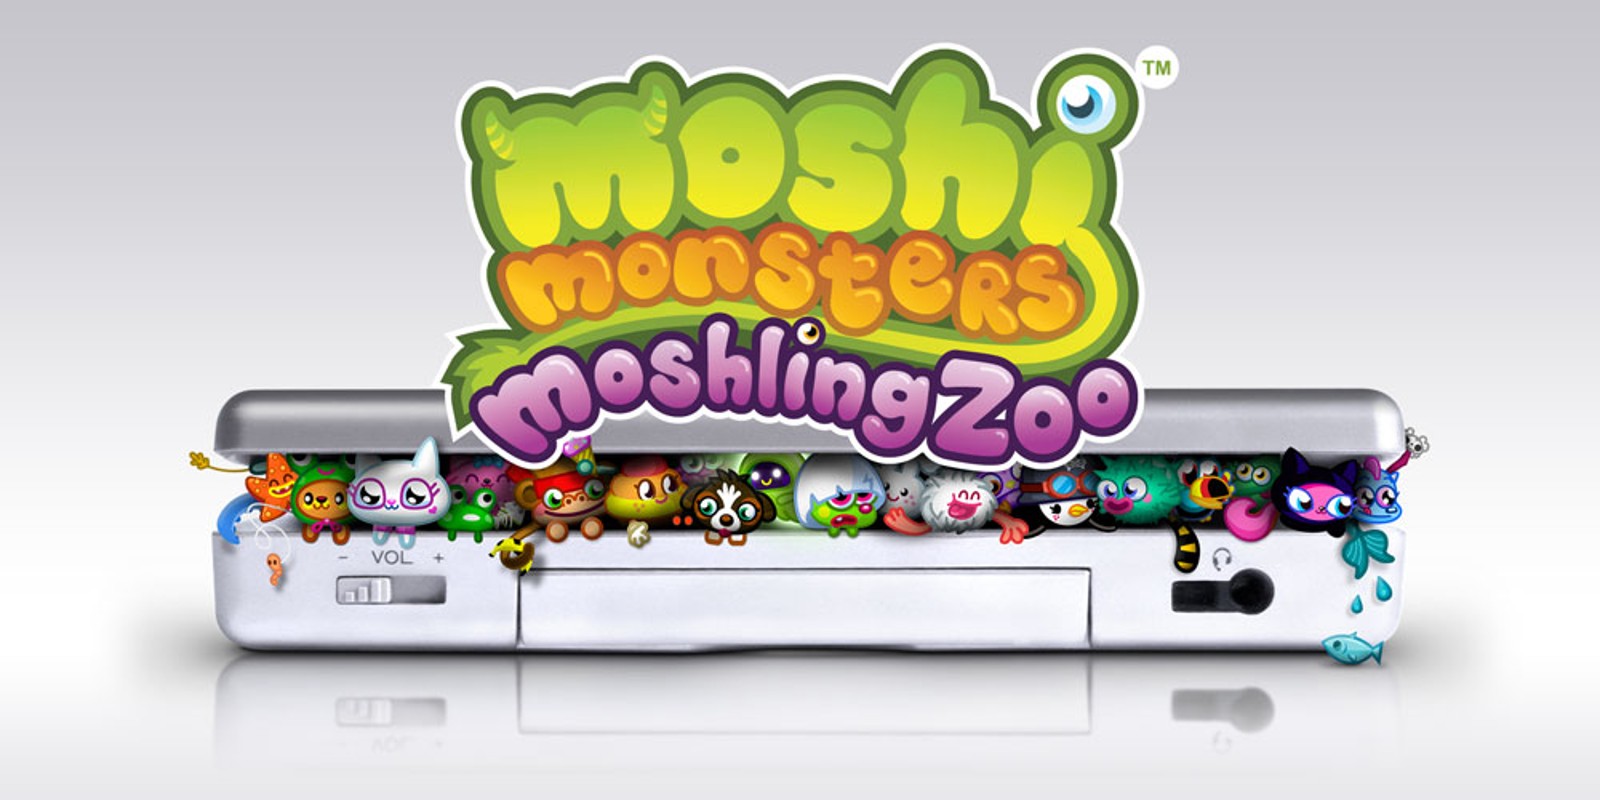 Moshi monsters nintendo 3ds codes